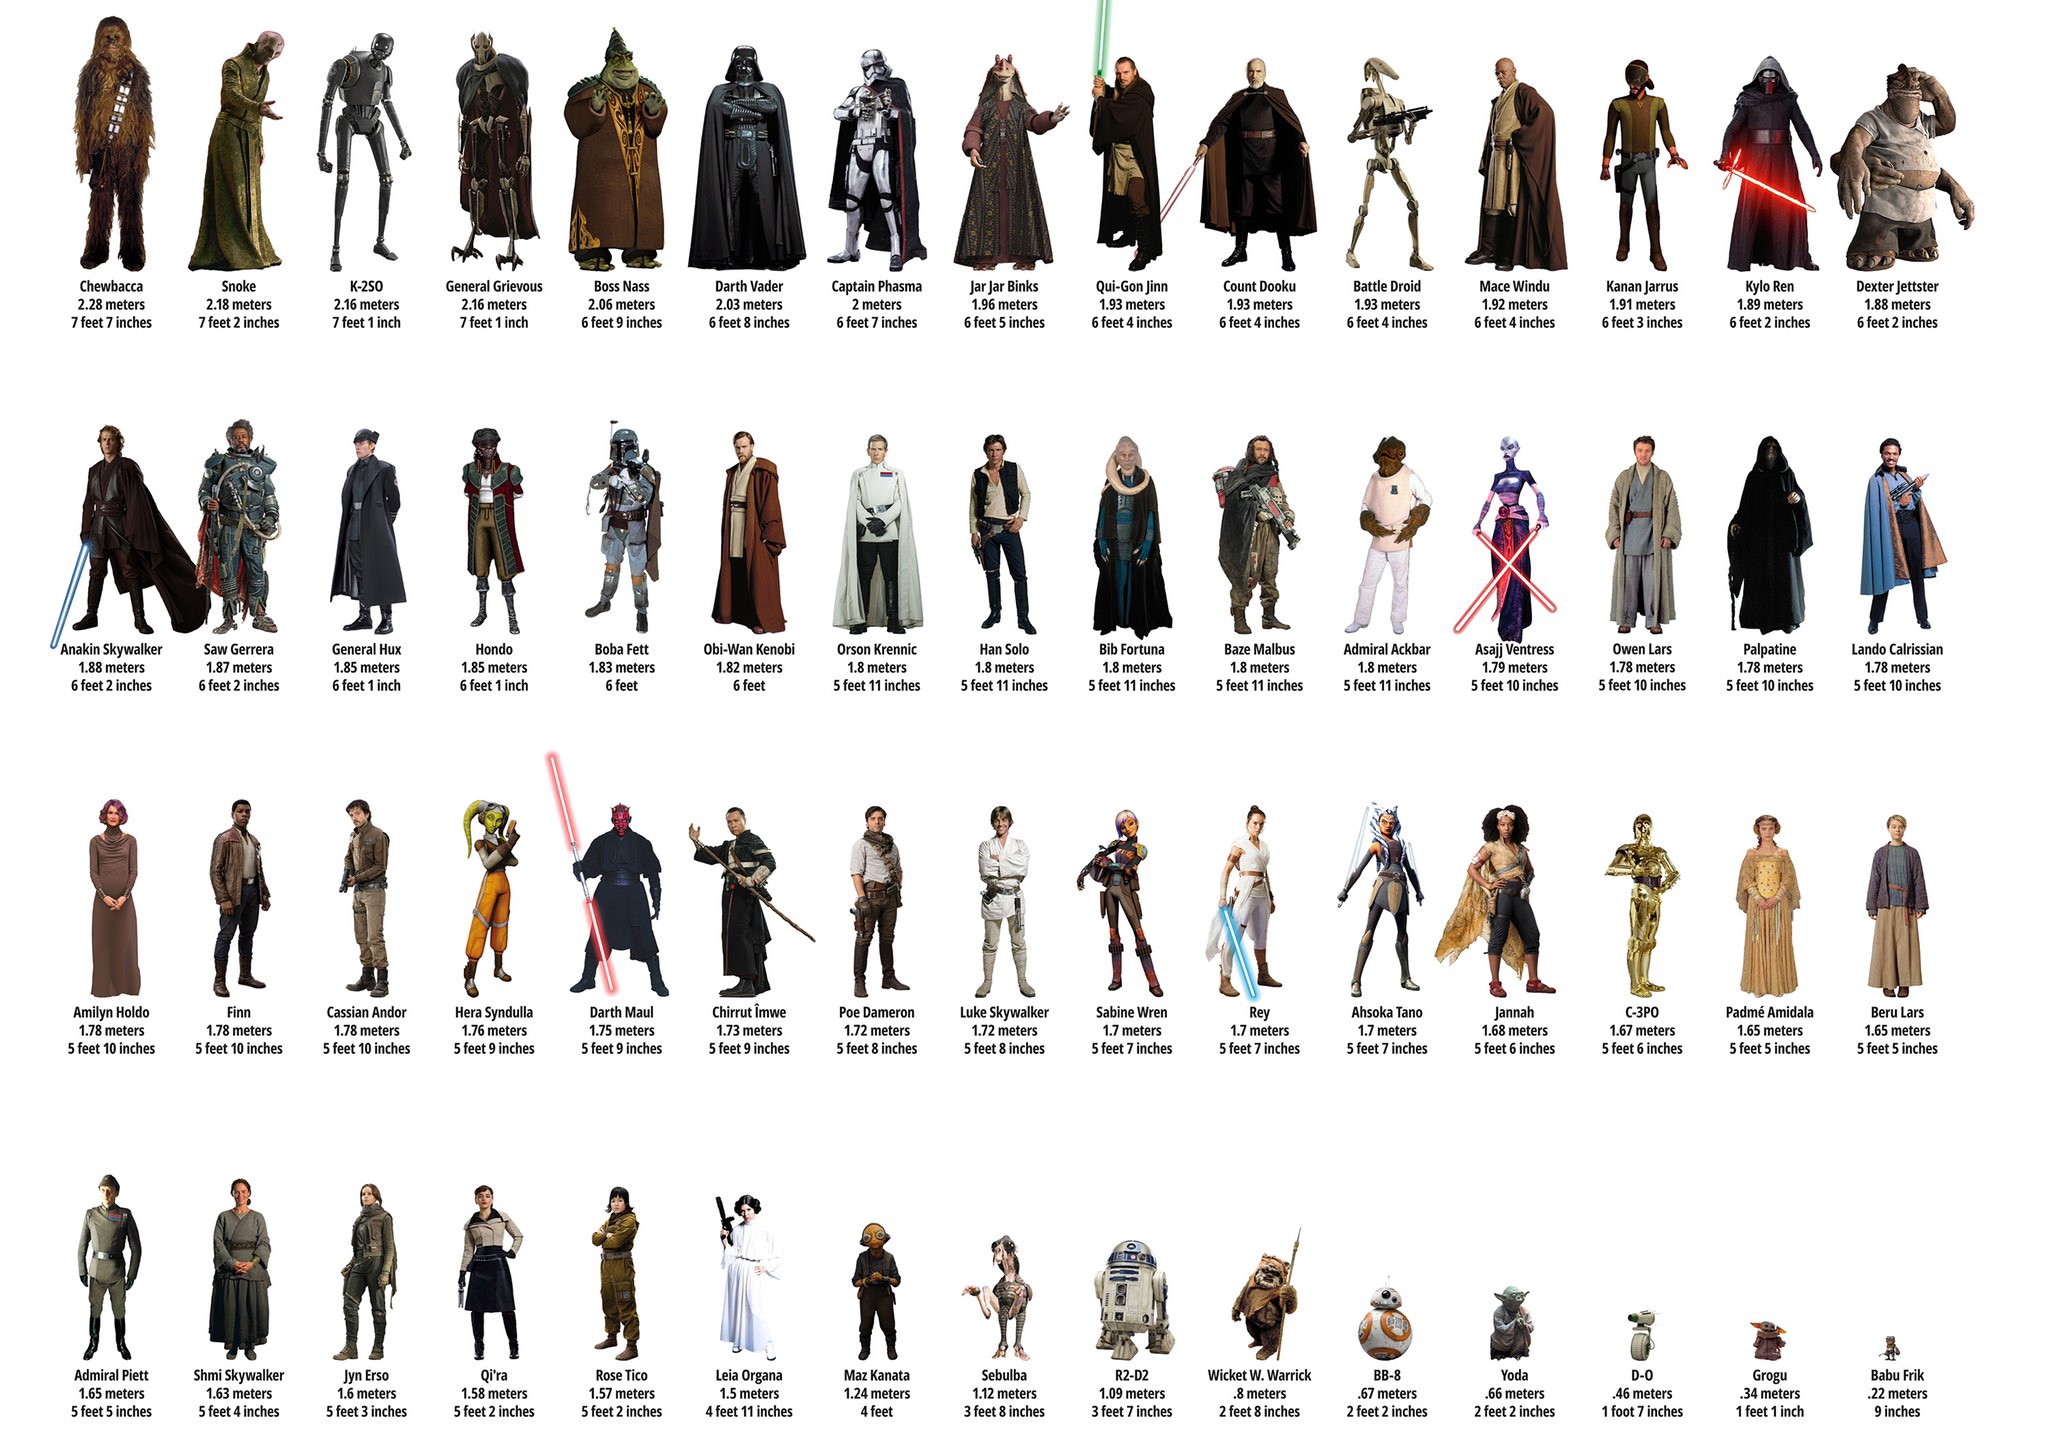 Cilia Oranje Booth Jedi Collecting on Twitter: "Character height chart Credit: u/--TheForce--  on r/StarWars #StarWars https://t.co/a9LXJDlxHe" / Twitter